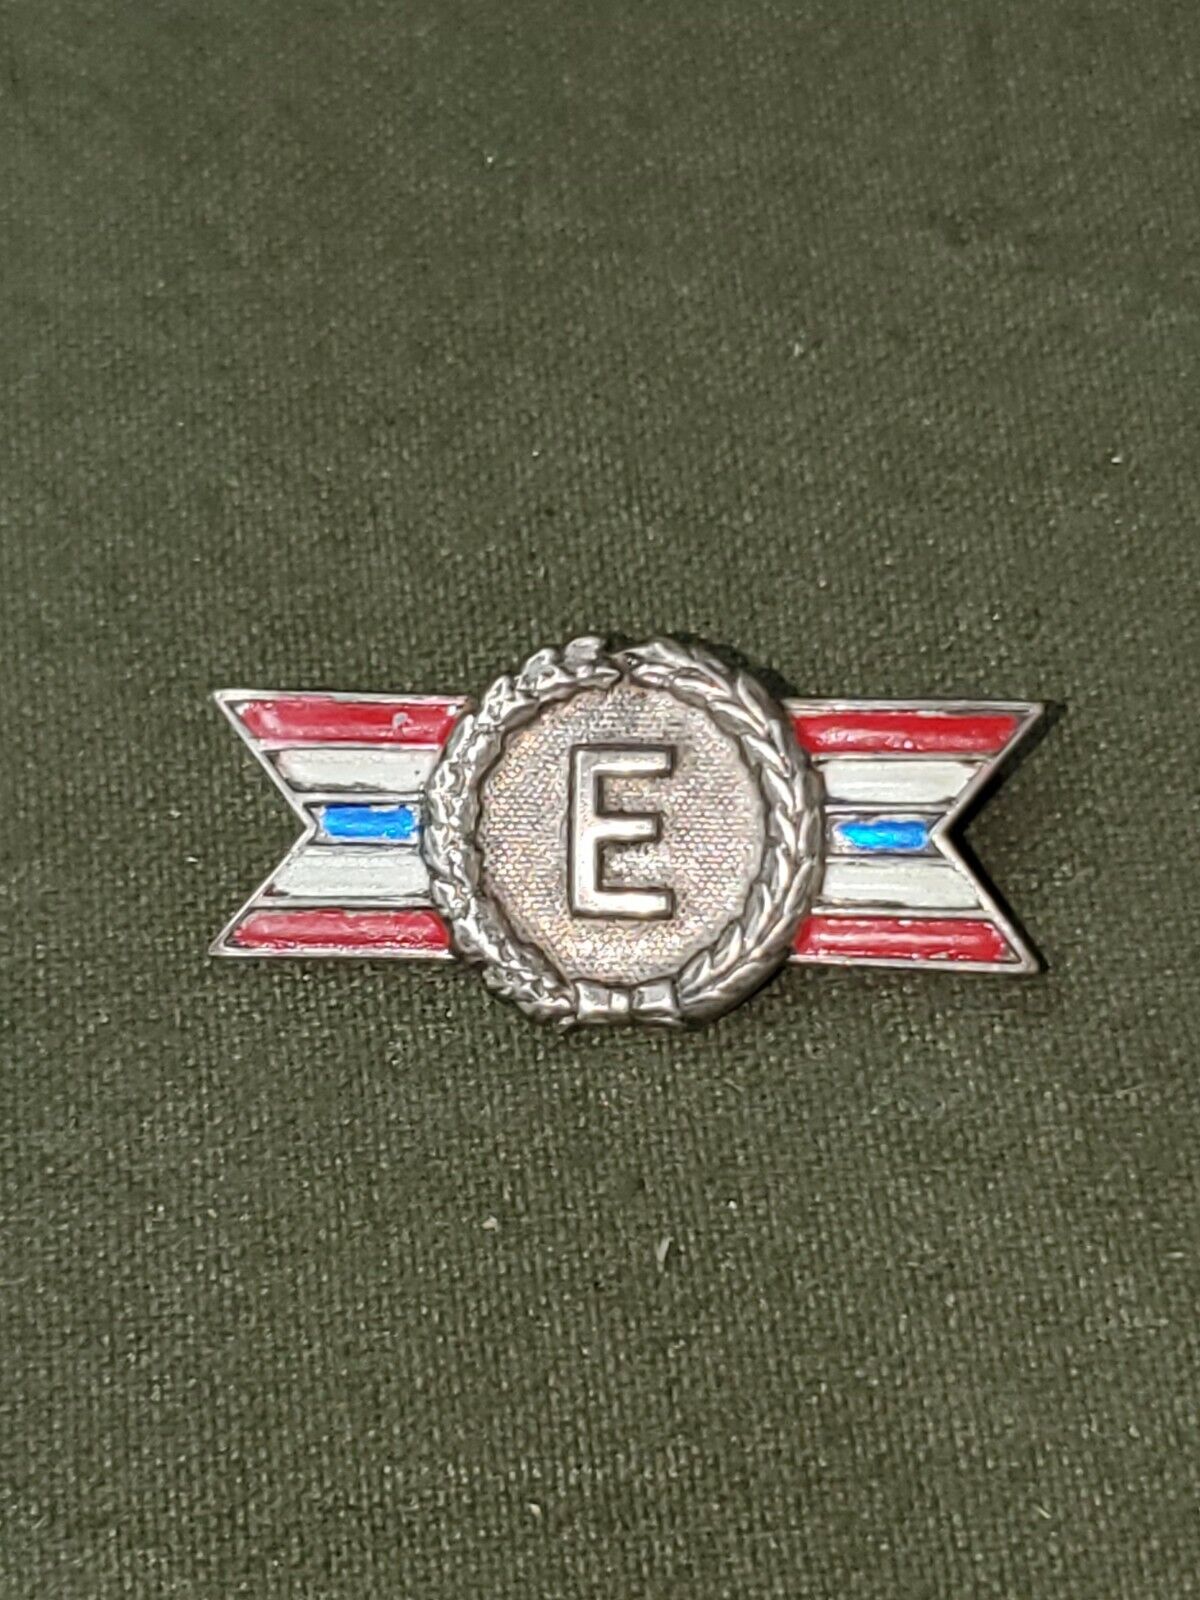 WWII Army Navy E for Excellent Award Pin #9